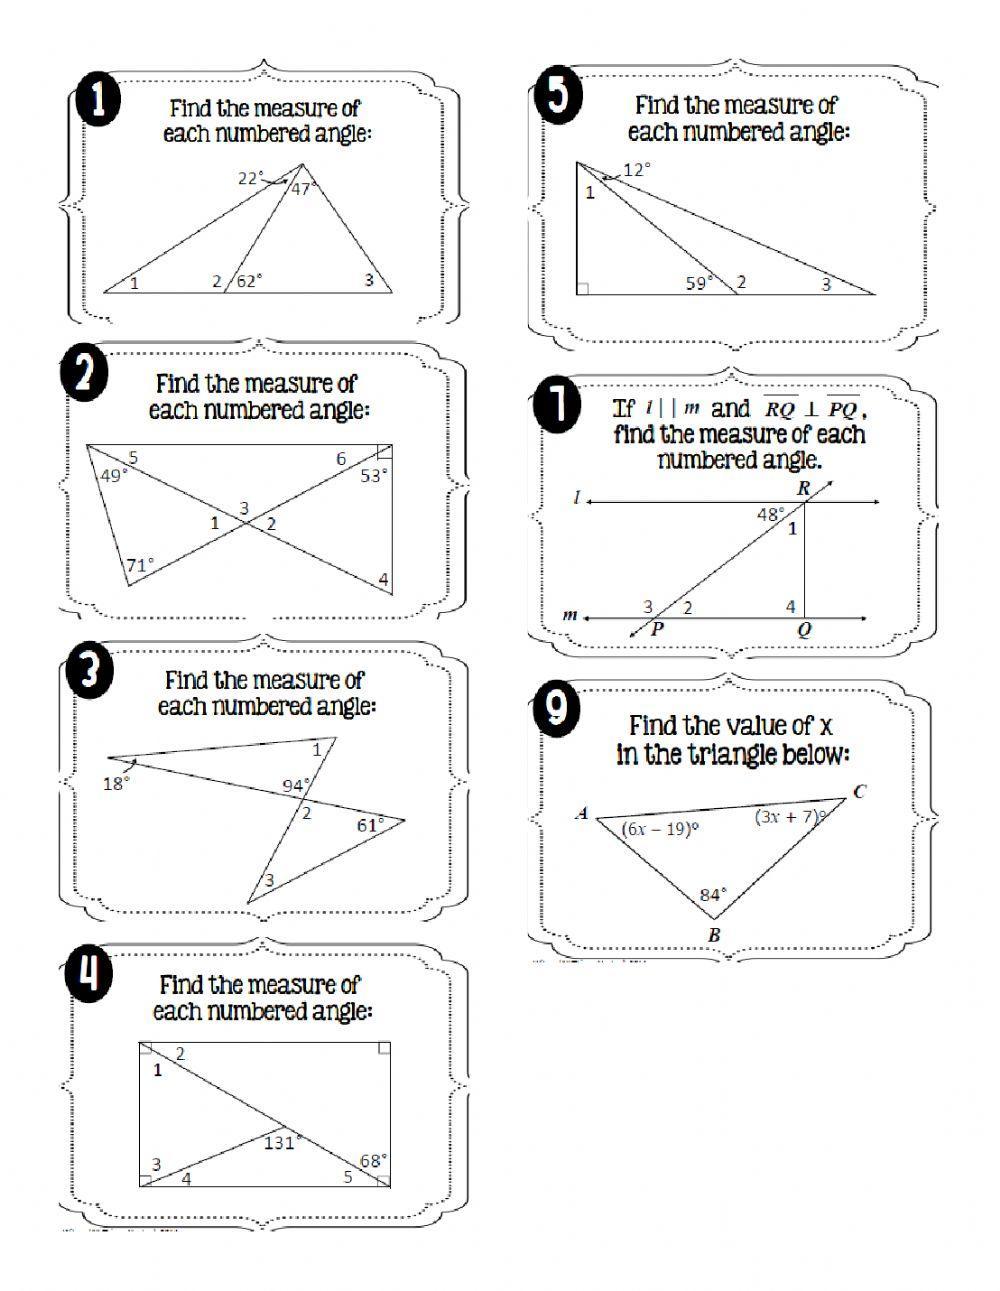 Interior Angles of Triangles